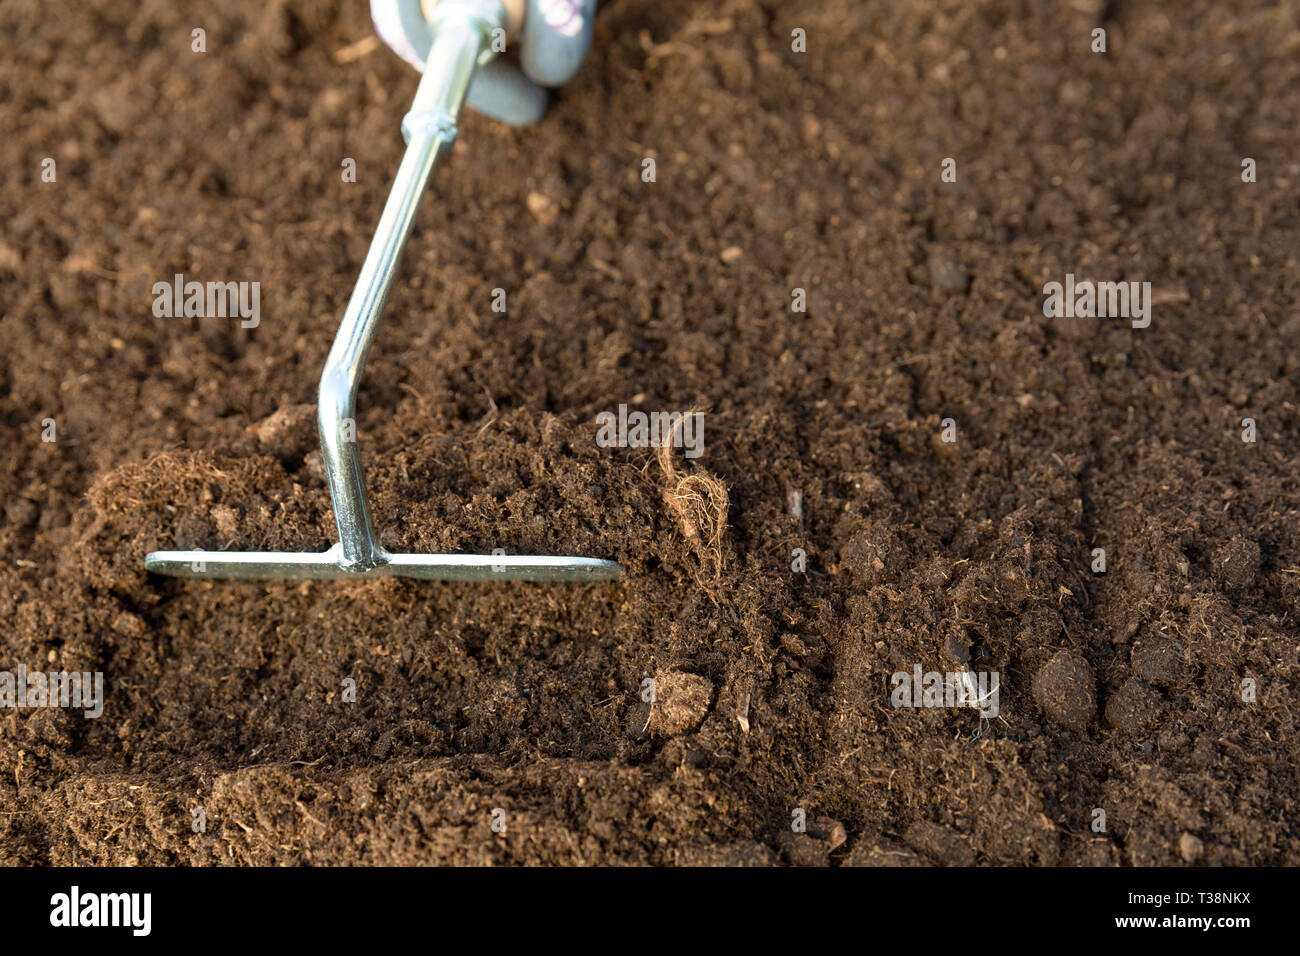 Hand of gardener woman digging a hole in soil with gardening tool. Spring garden work concept Stock Photo